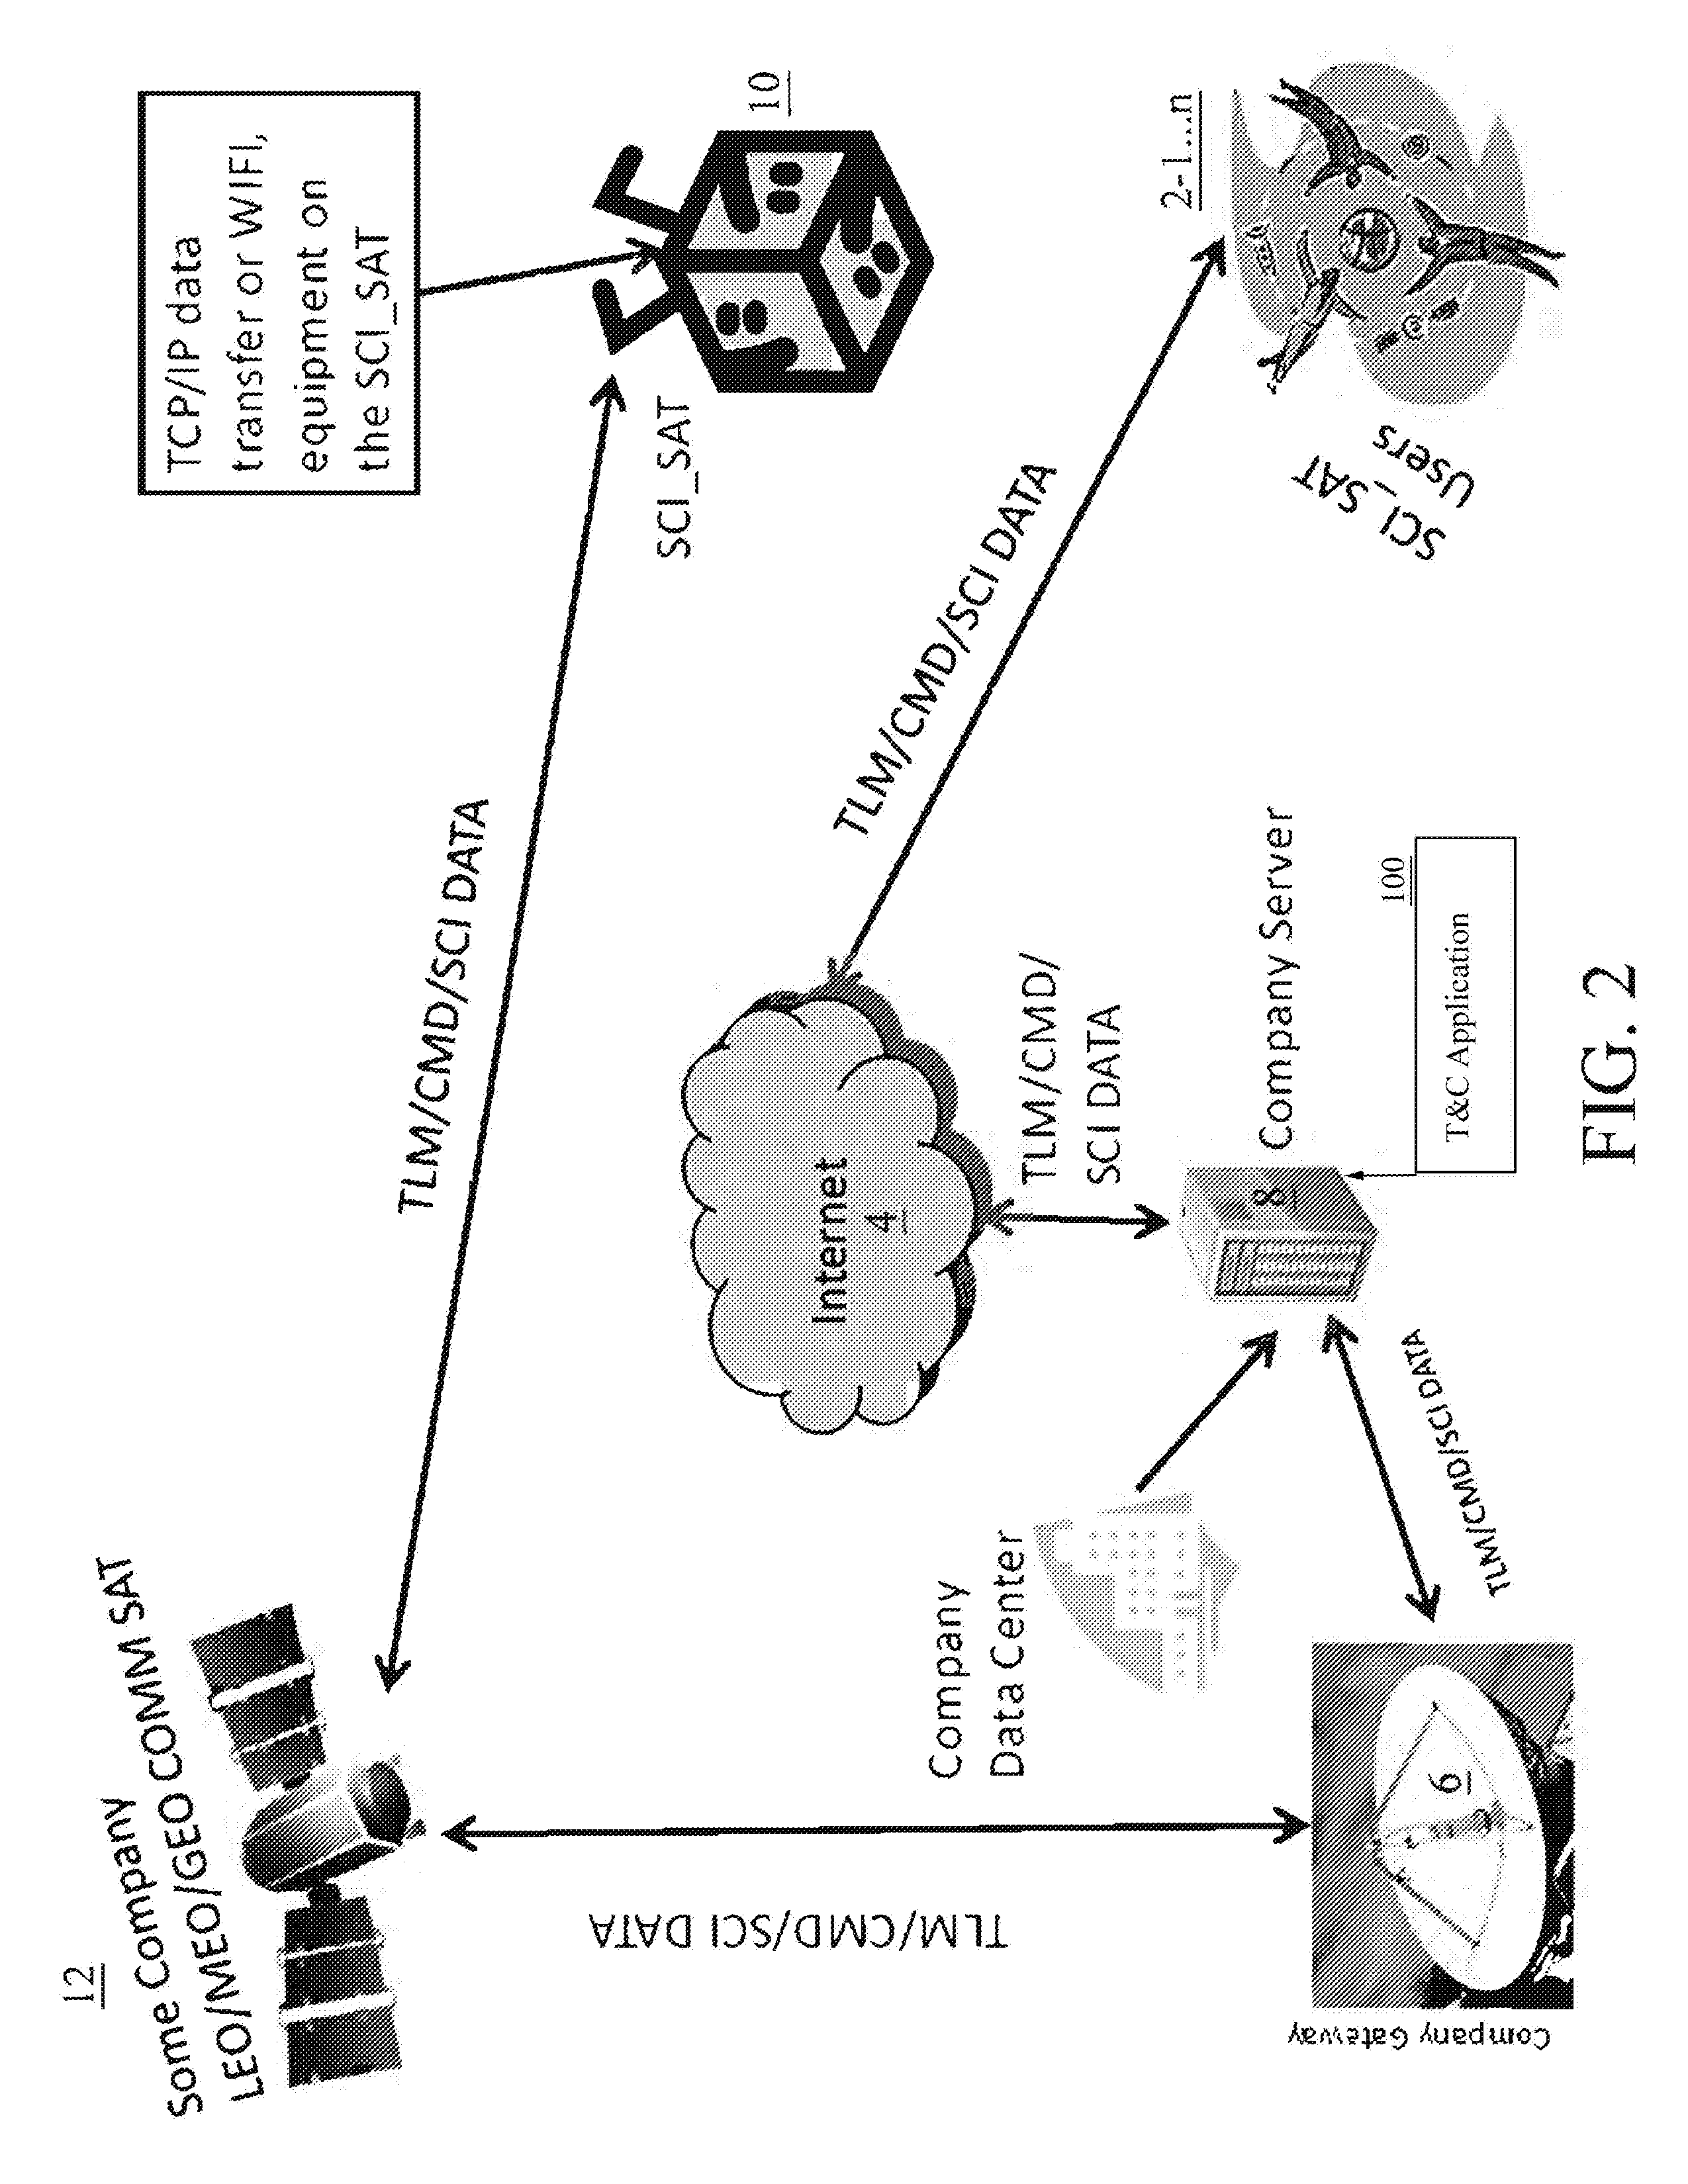 Ip-based satellite command, control, and data transfer